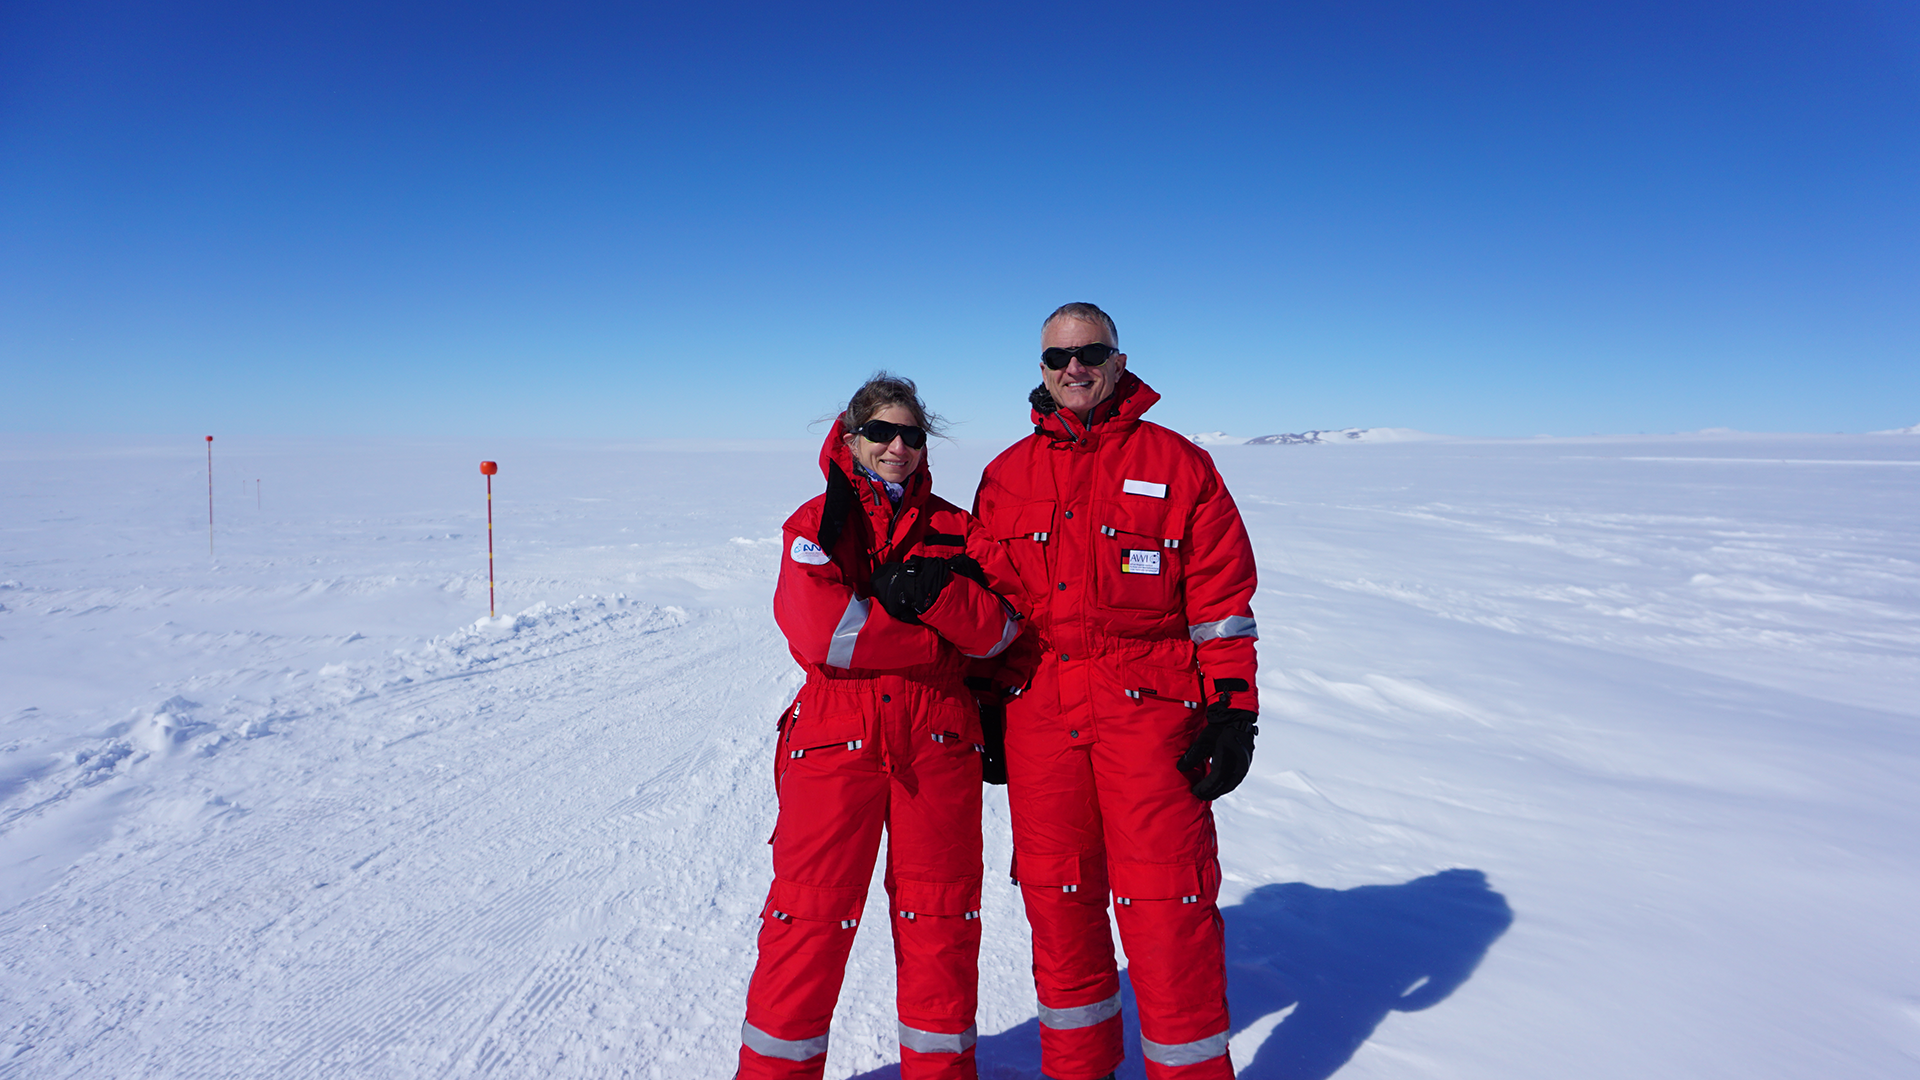 Researchers in Antarctica, Anna-Lisa Paul and Rob Ferl